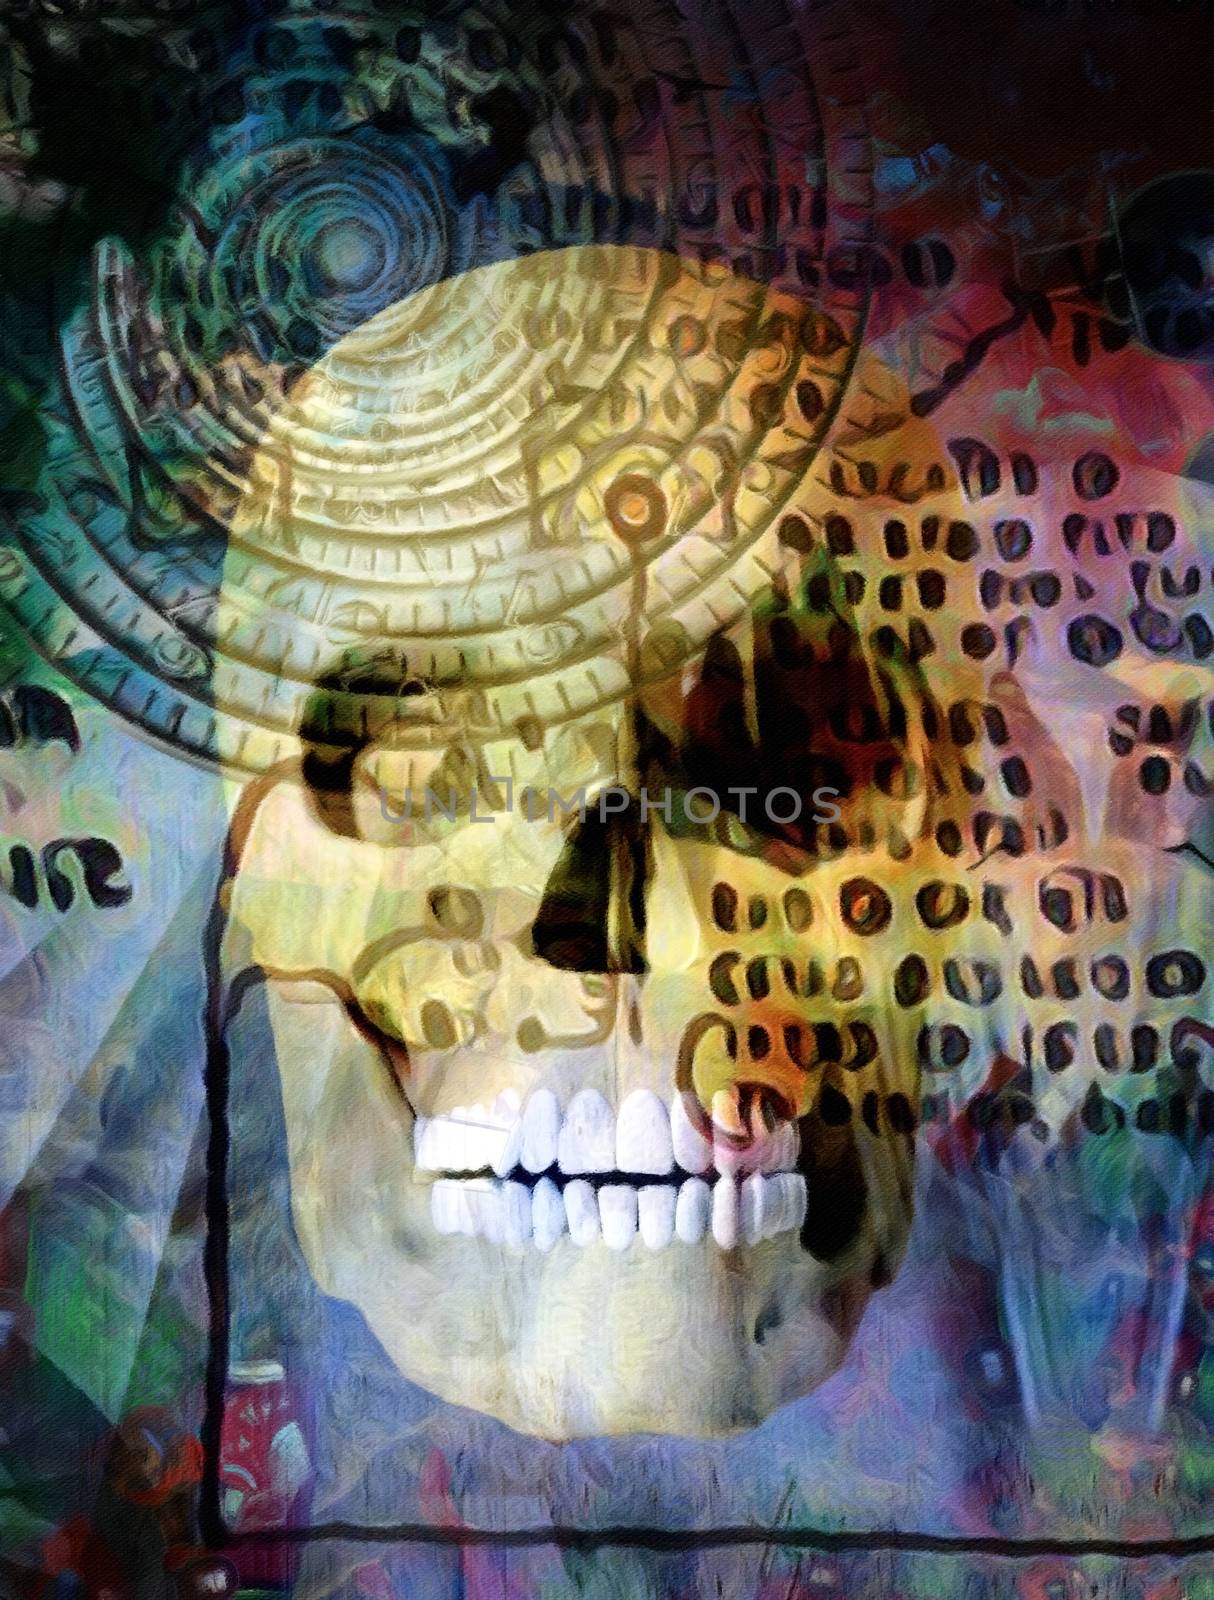 Surreal composition. Praying hands, men with thoughts and hopes, human's skull. 3D rendering